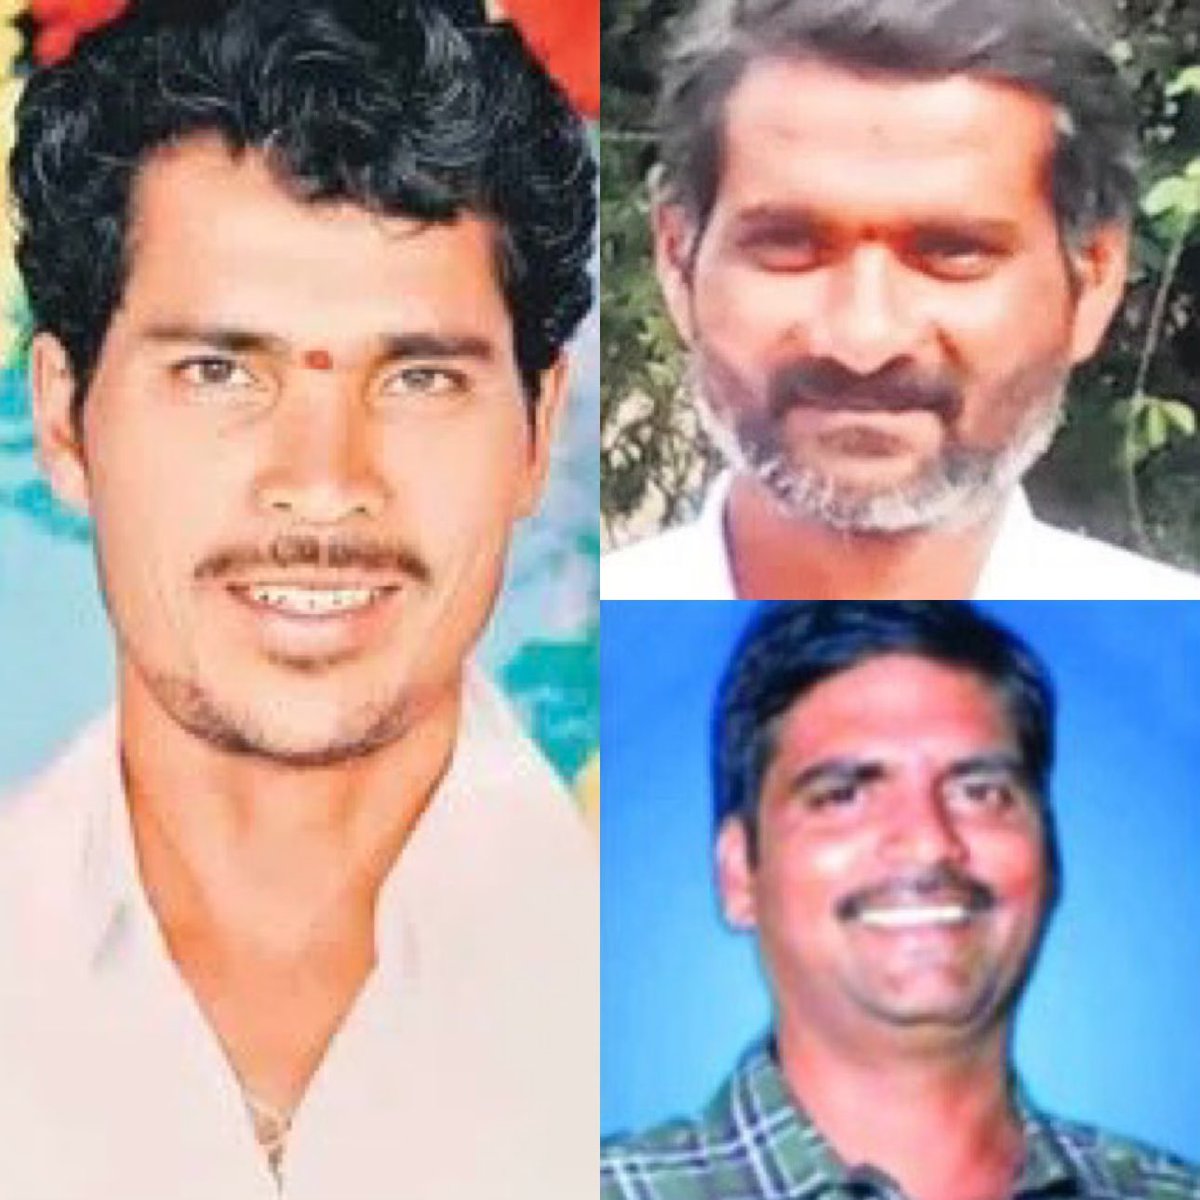 The suicide of farmers is not stopping in #Telangana!

Now, Chikudu Srinivas (48) of Siddipet district, Jatoth Srinu (40) of Mahabubabad district, and Santosh Yadav (34) of Peddapalli district have committed suicide by drinking pesticide.

Why aren't the media and liberals…